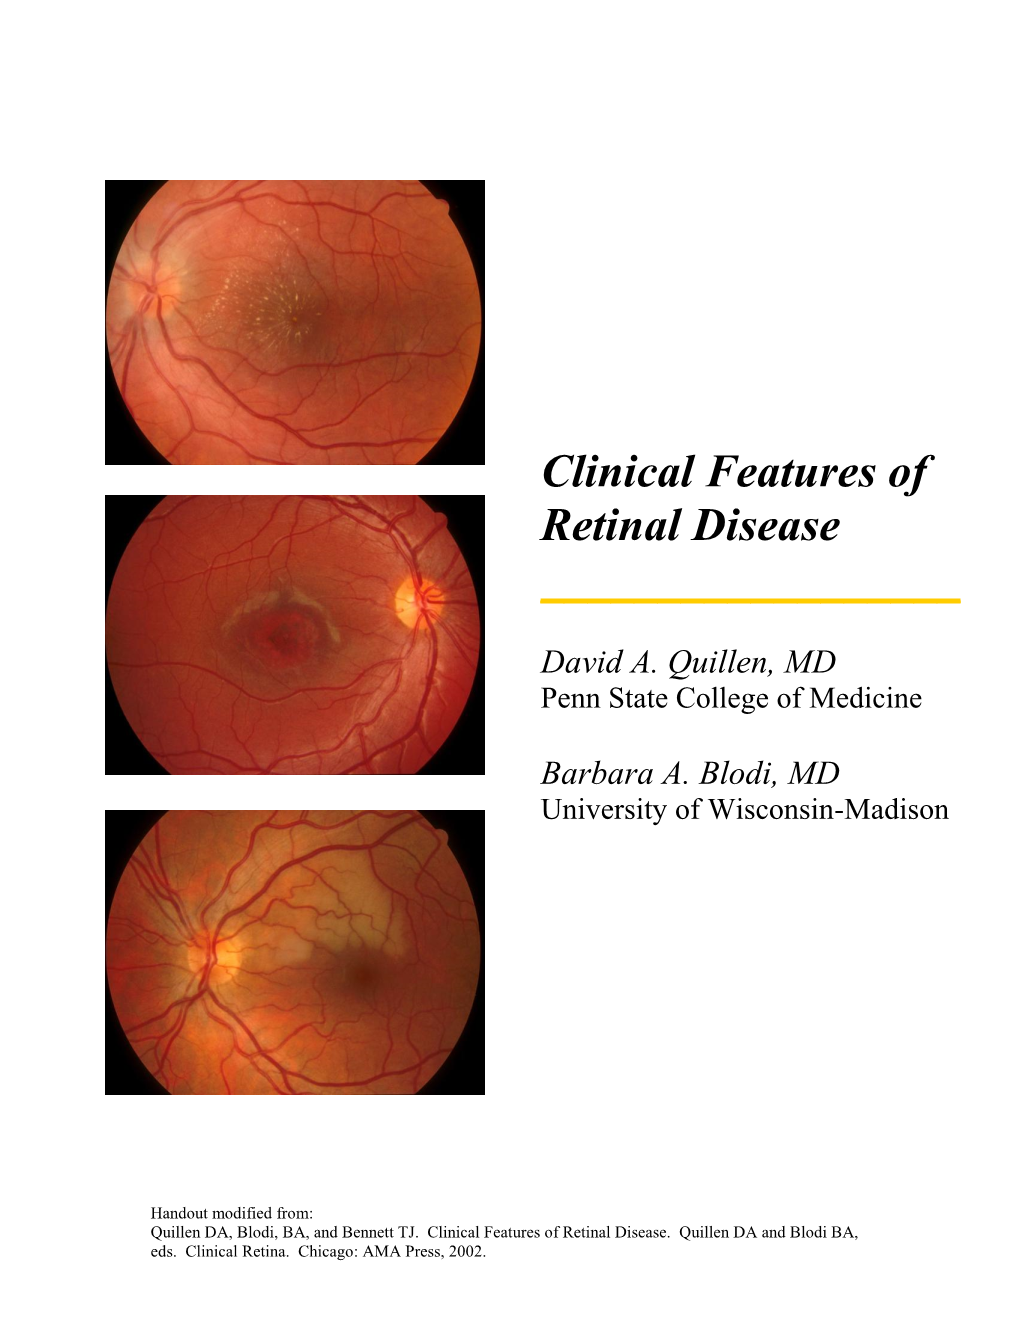 Clinical Features of Retinal Disease